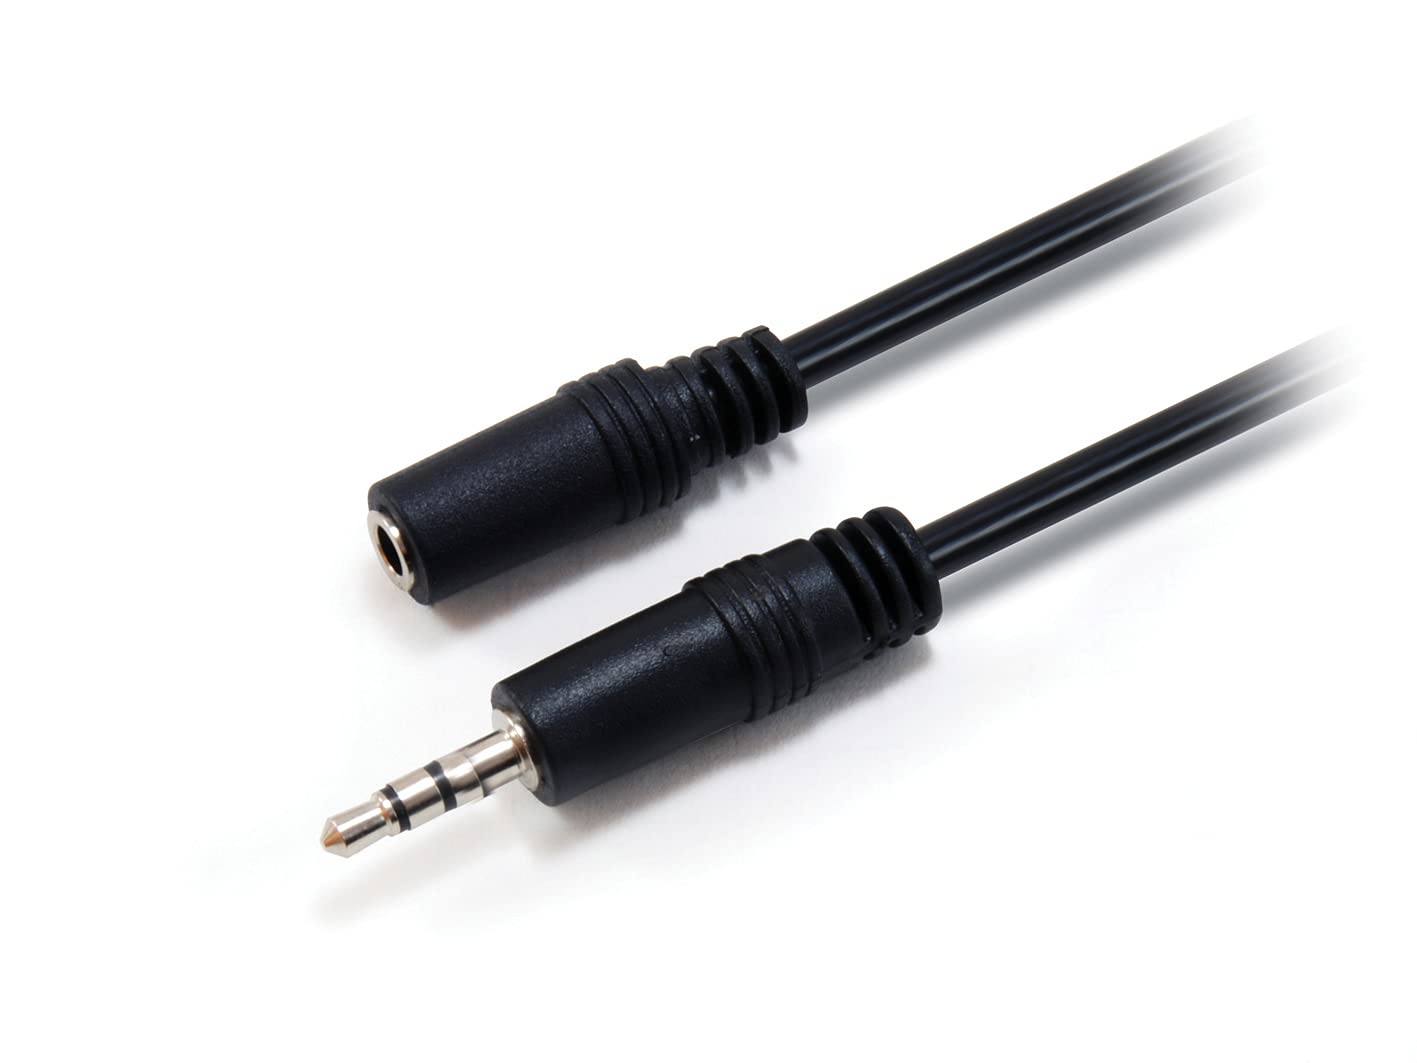 AUDIO CABLE 3.5MM MALE TO FEMALE, 2